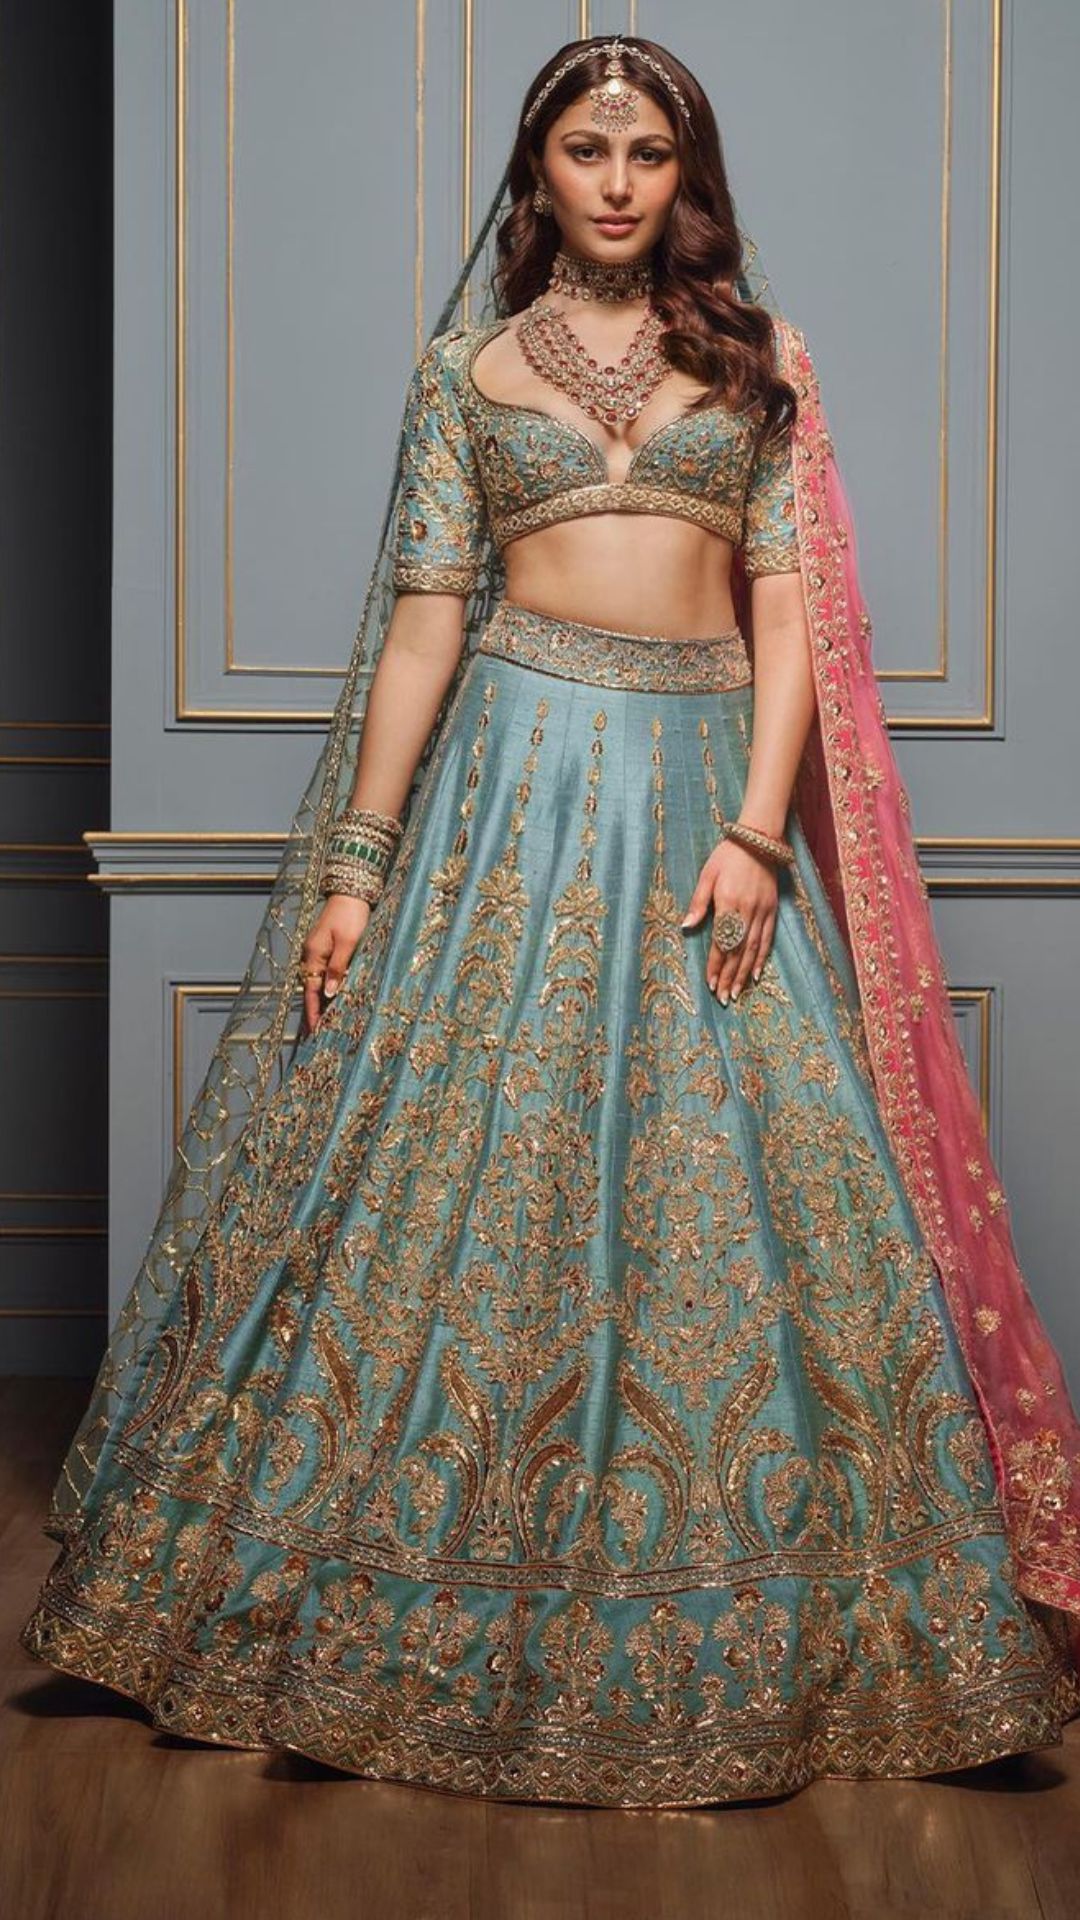 Bewitching Peacock Blue zari and Sequins embroidered net Semi Stitched  Lehenga choli for wedding - MEGHALYA - 3424266